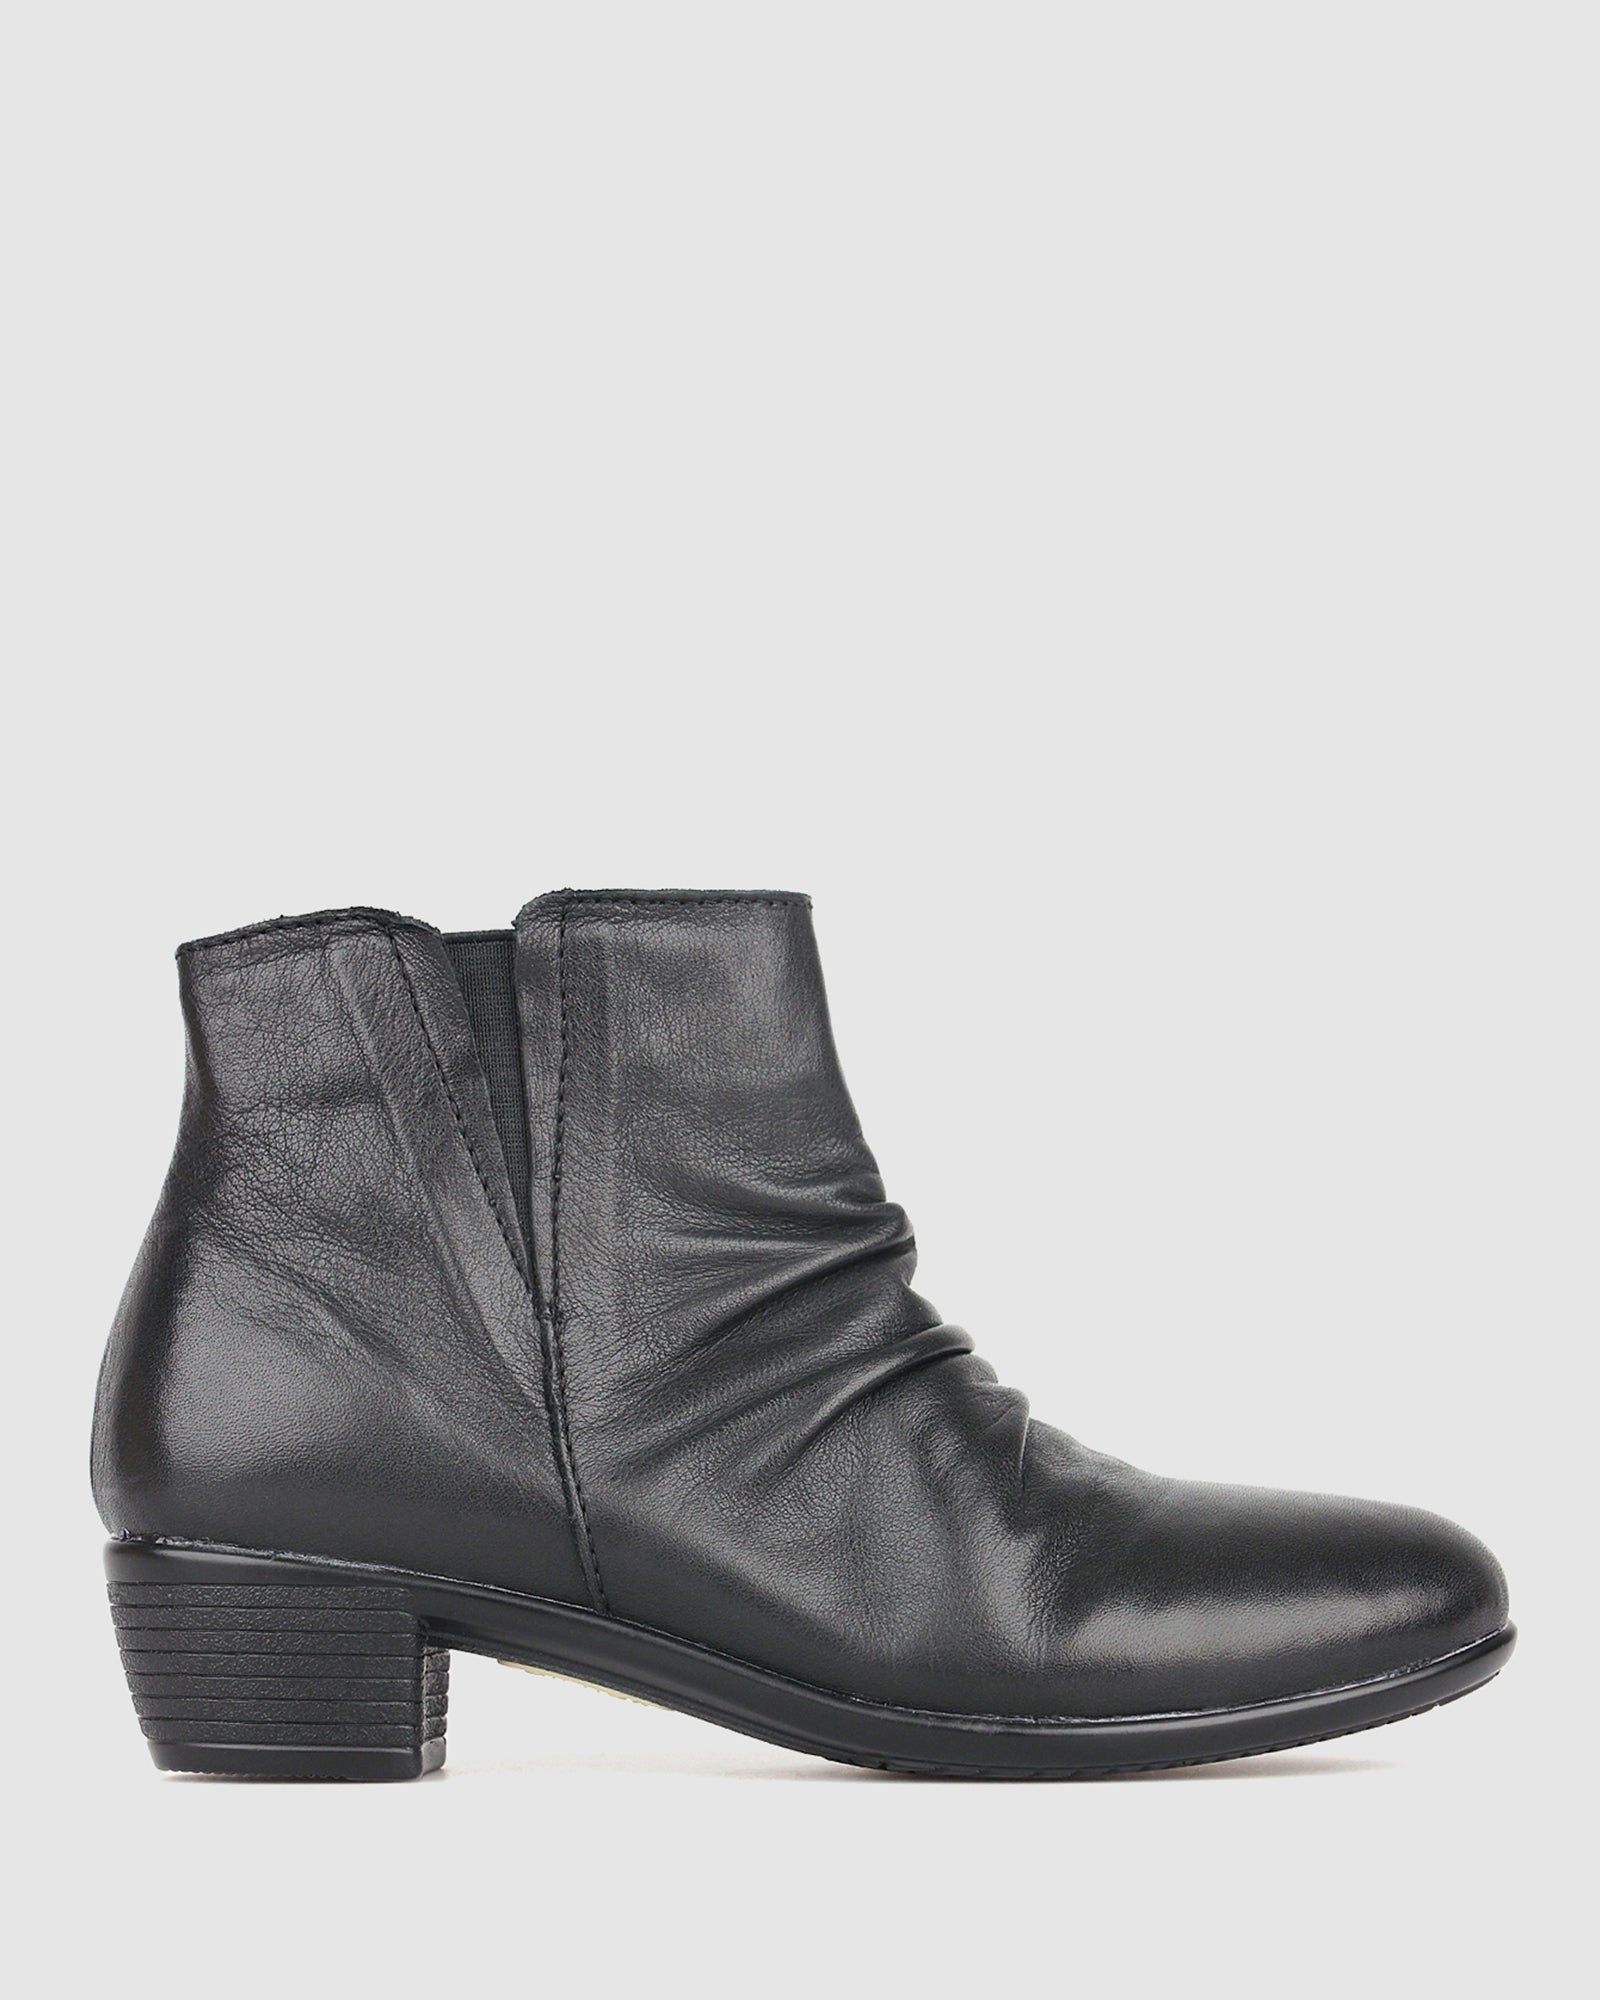 Buy GINNY Leather Ankle Boots by Airflex online - Betts